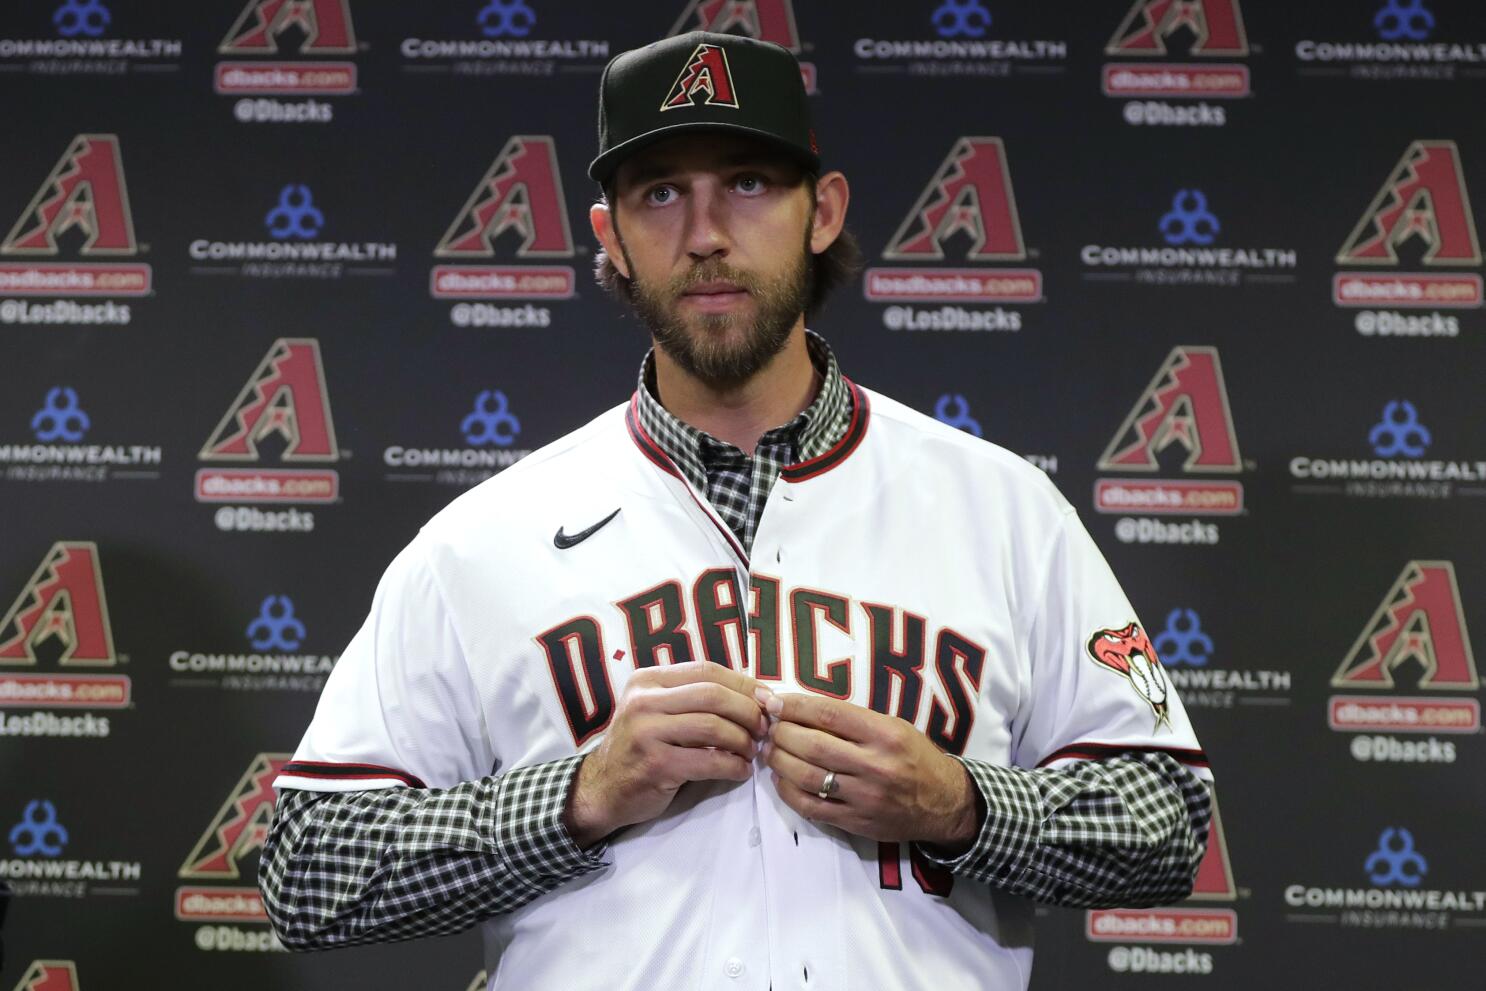 In a battle of pitchers hitting, Madison Bumgarner appeared as a pinch- hitter